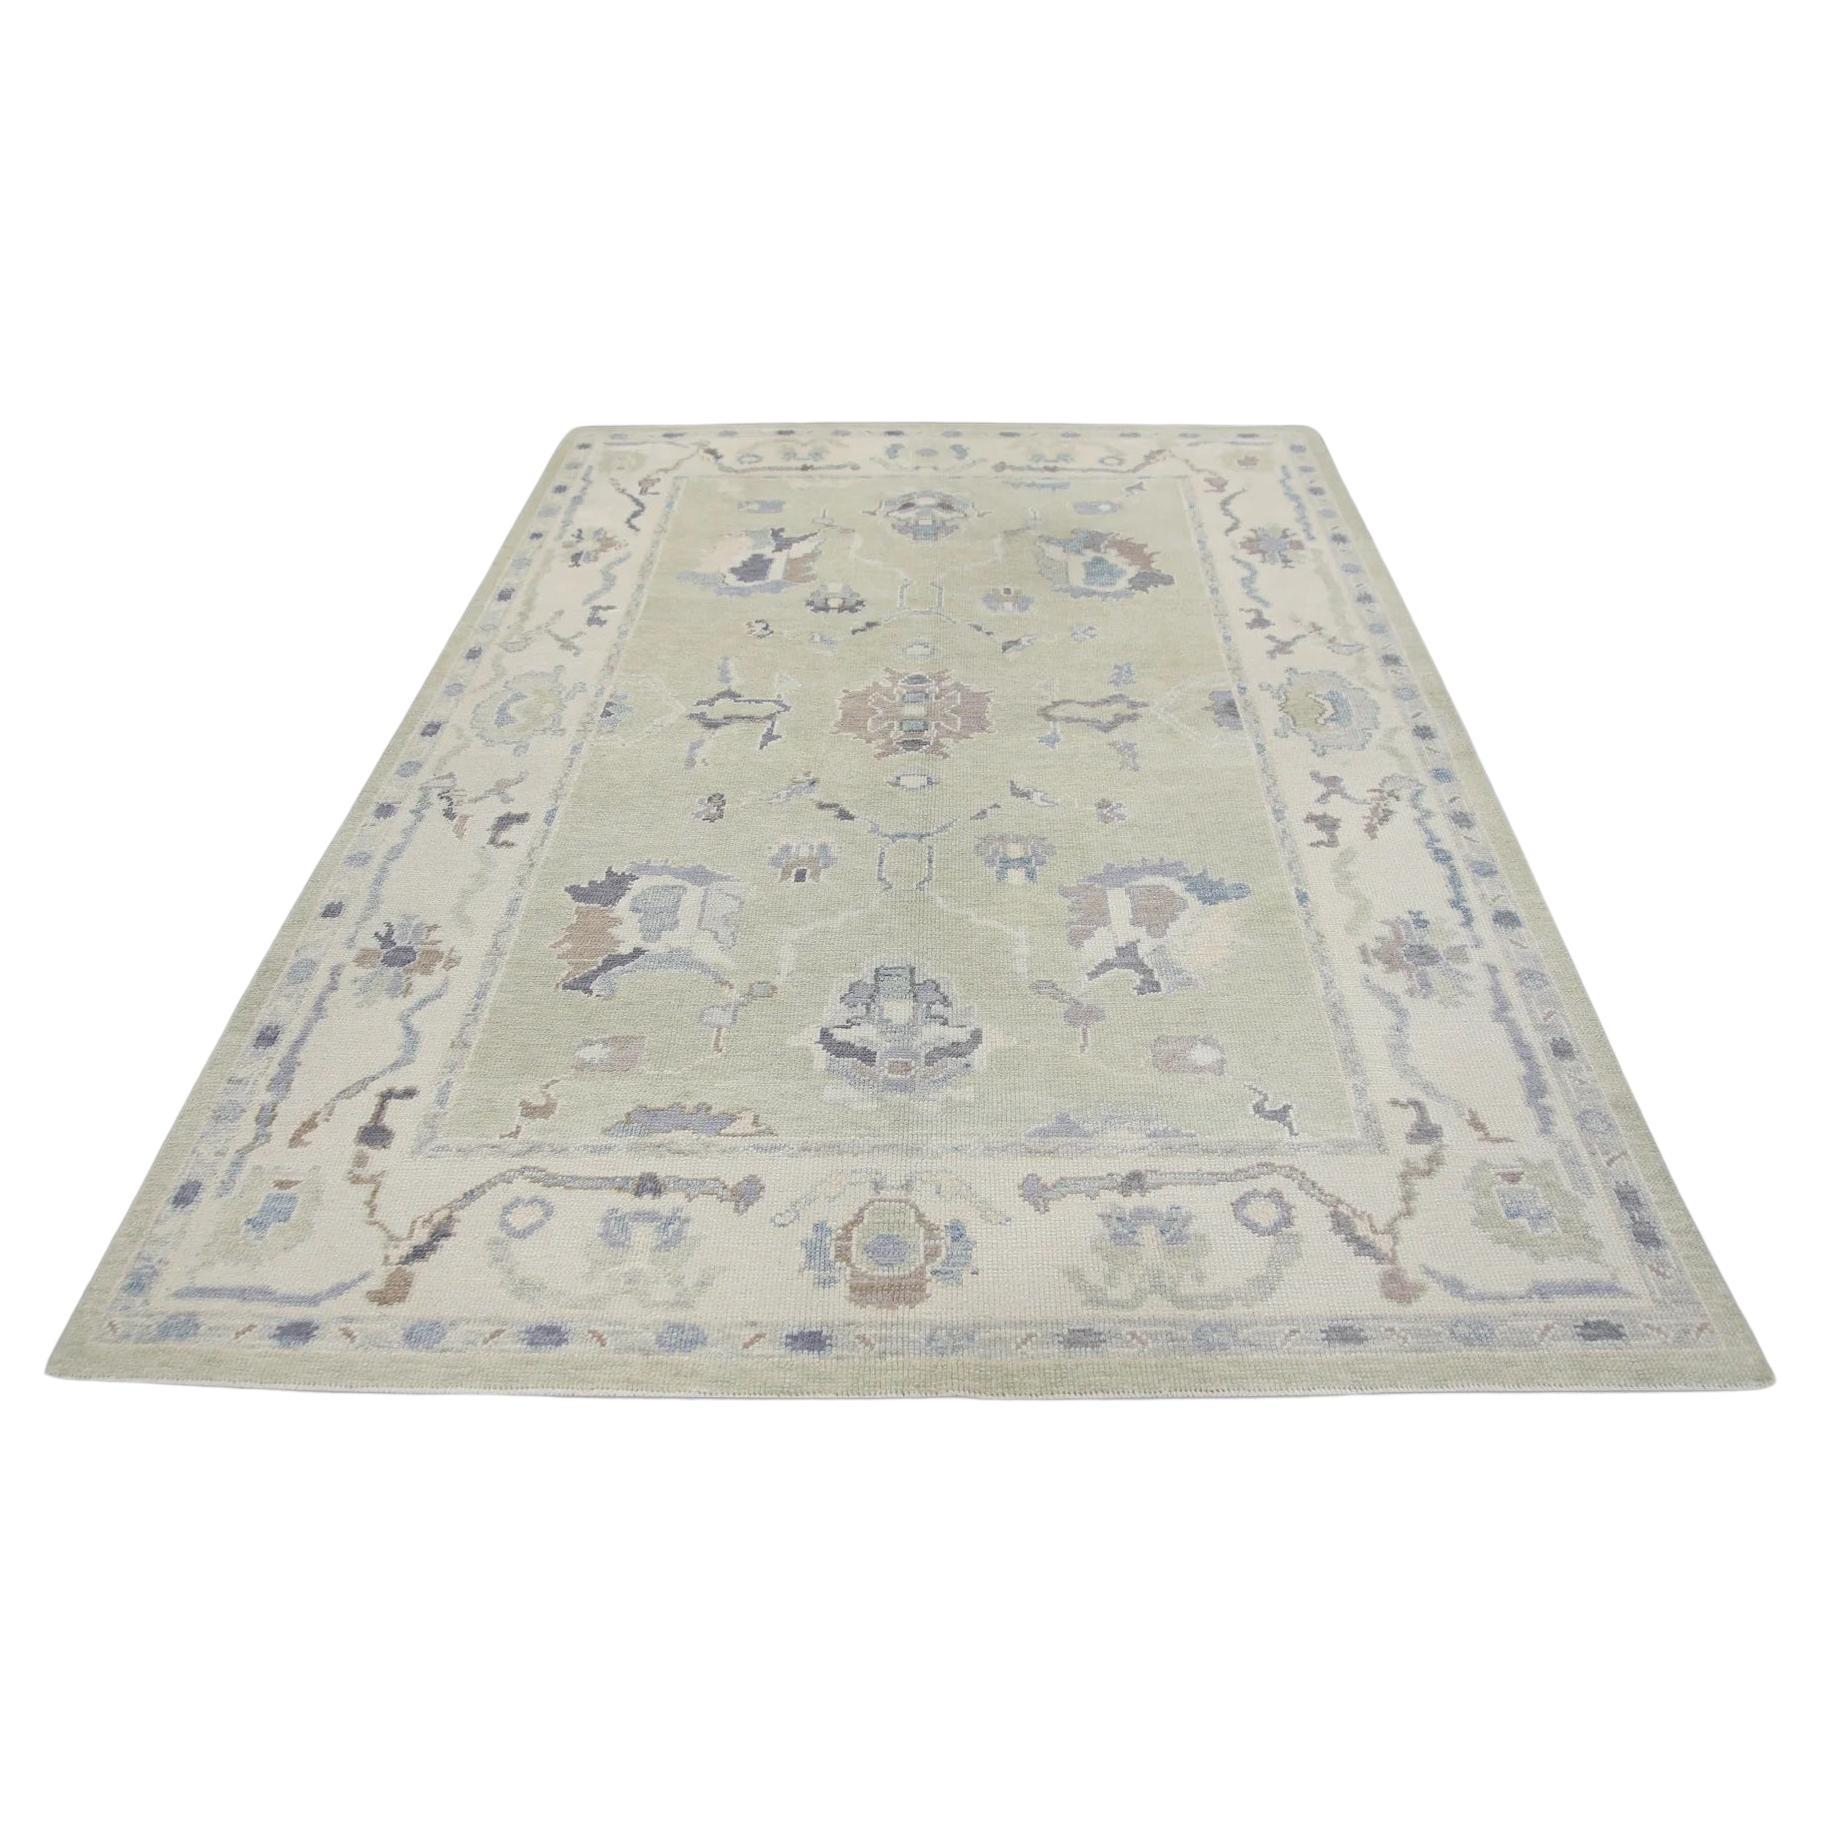 Pale Green Floral Handwoven Wool Turkish Oushak Rug 6' x 8'7"